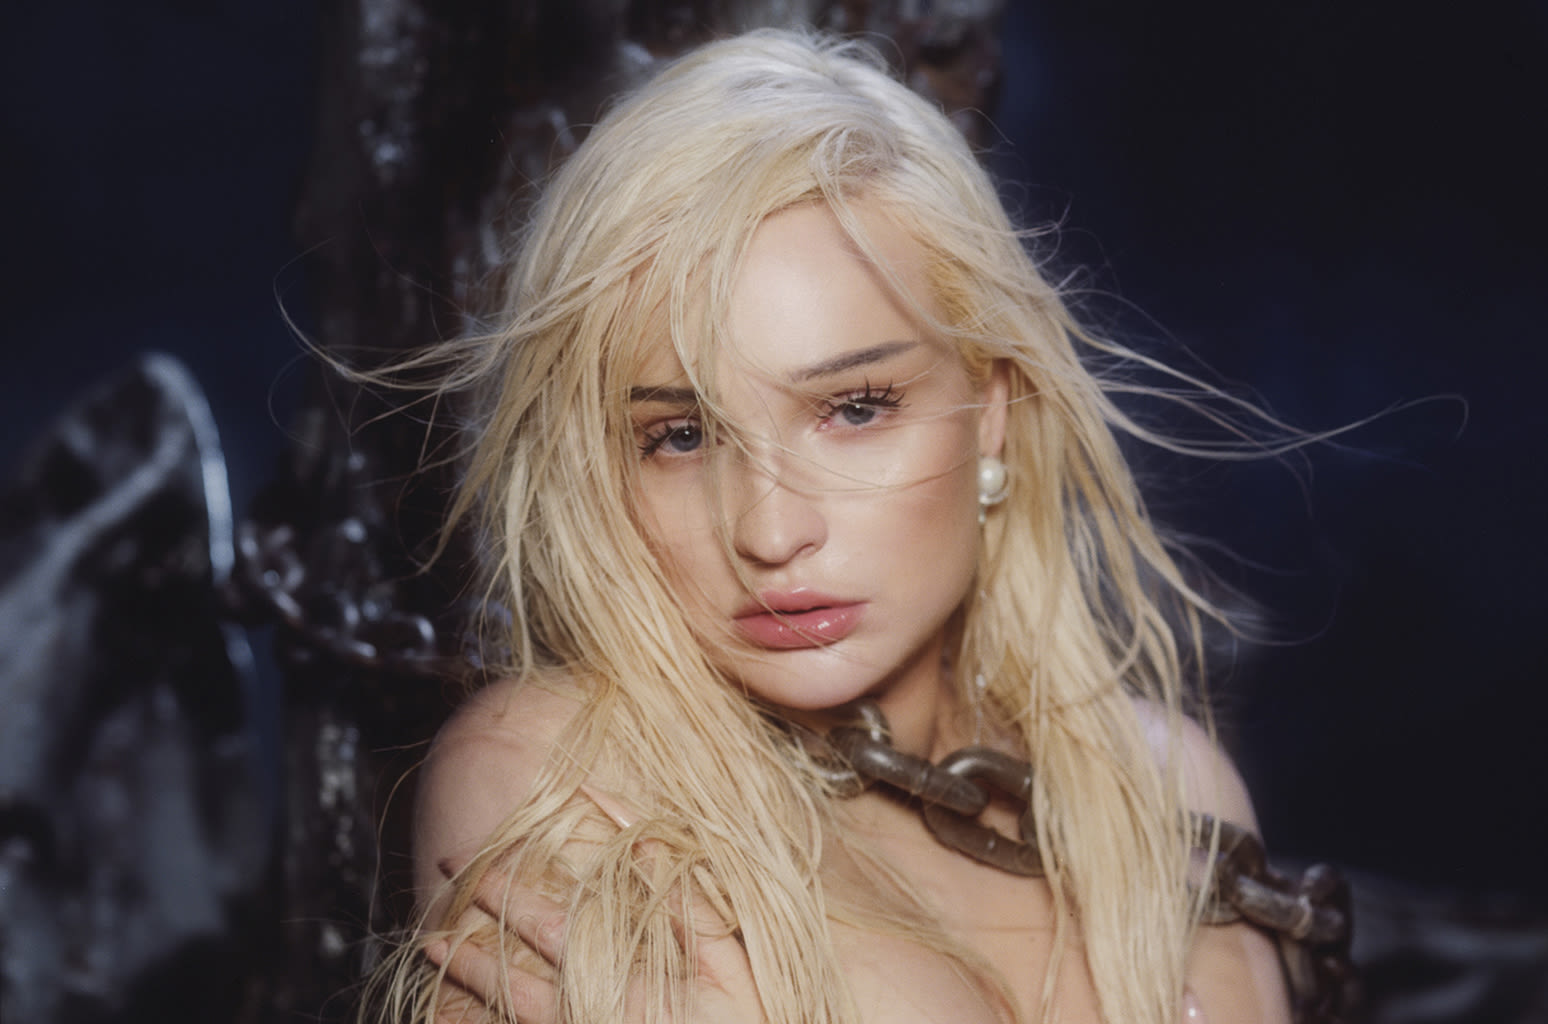 Kim Petras Encourages Fans to ‘Accept Yourself’ This Pride Season — But Only on Their Own Terms